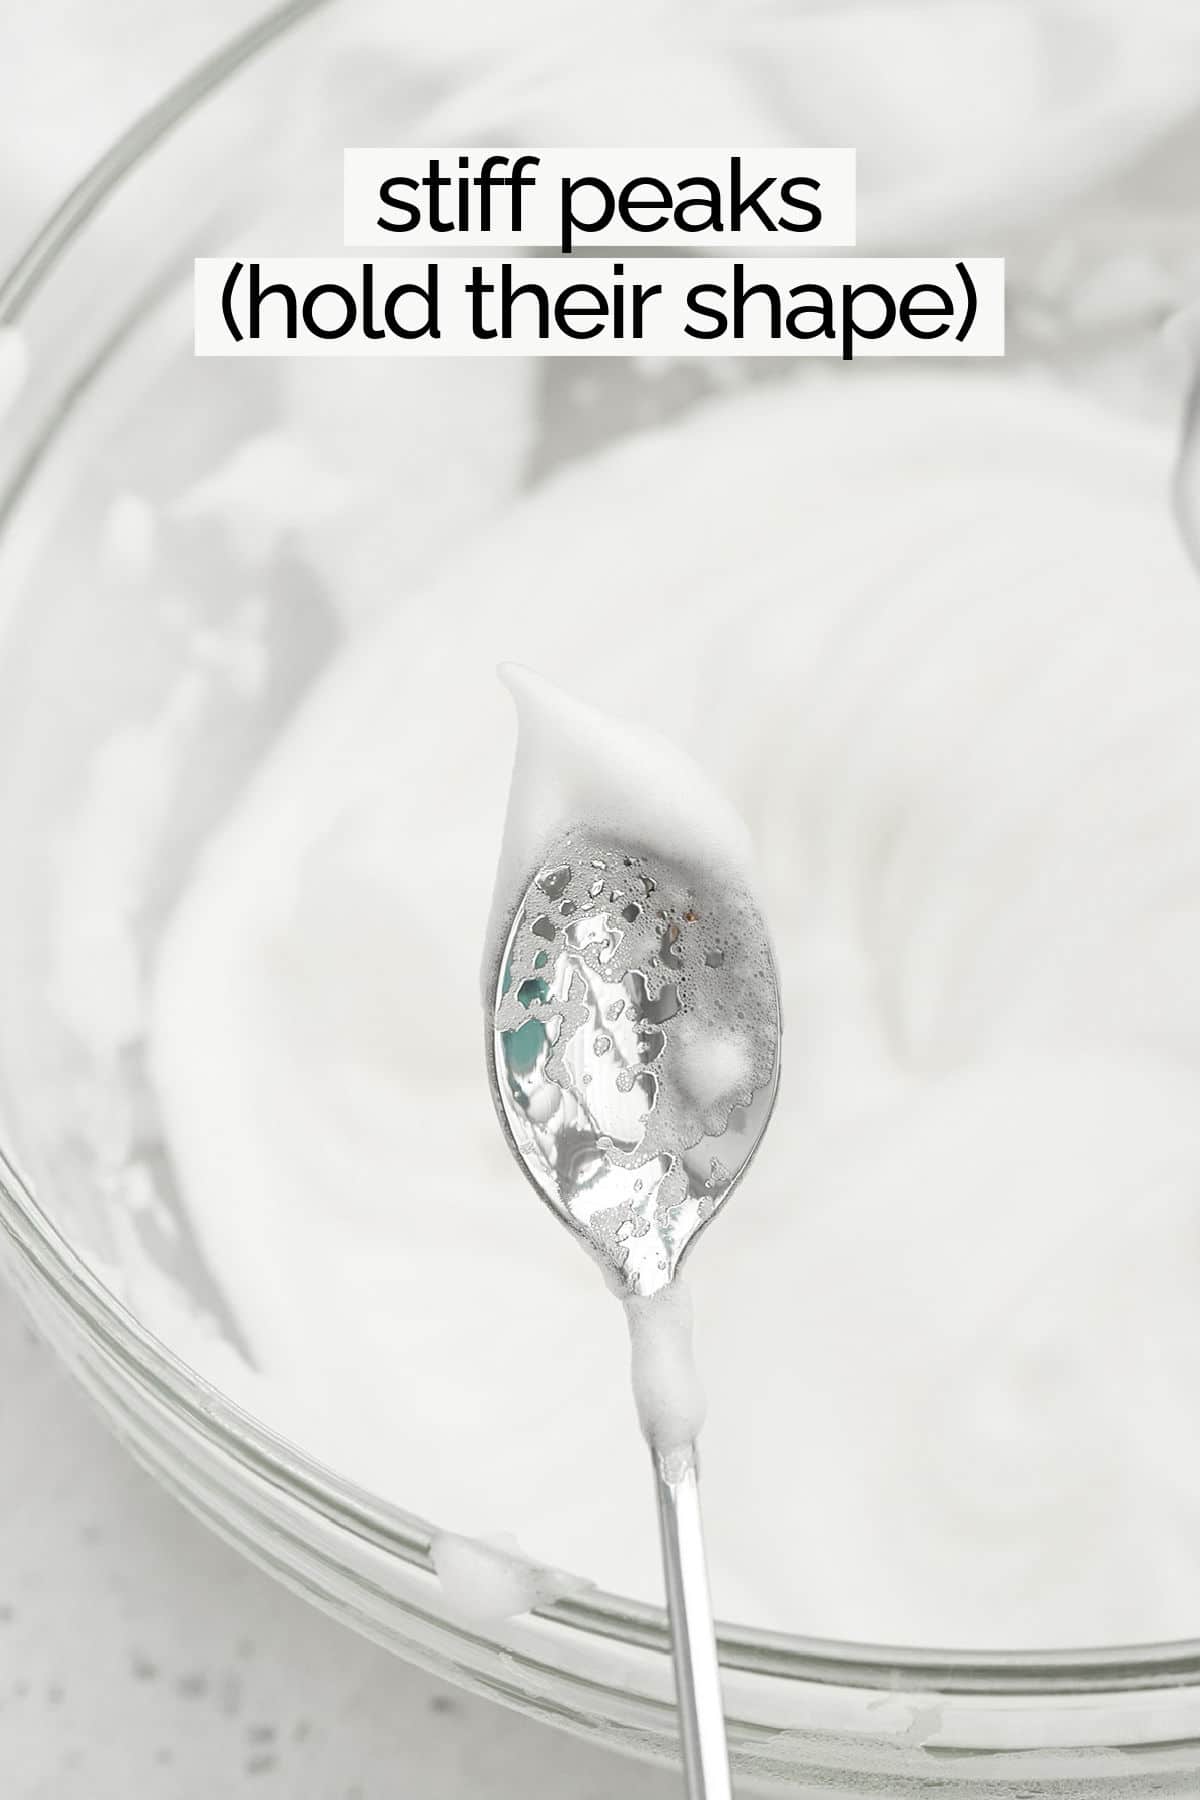 Egg whites whipped to stiff peaks on the end of a spoon